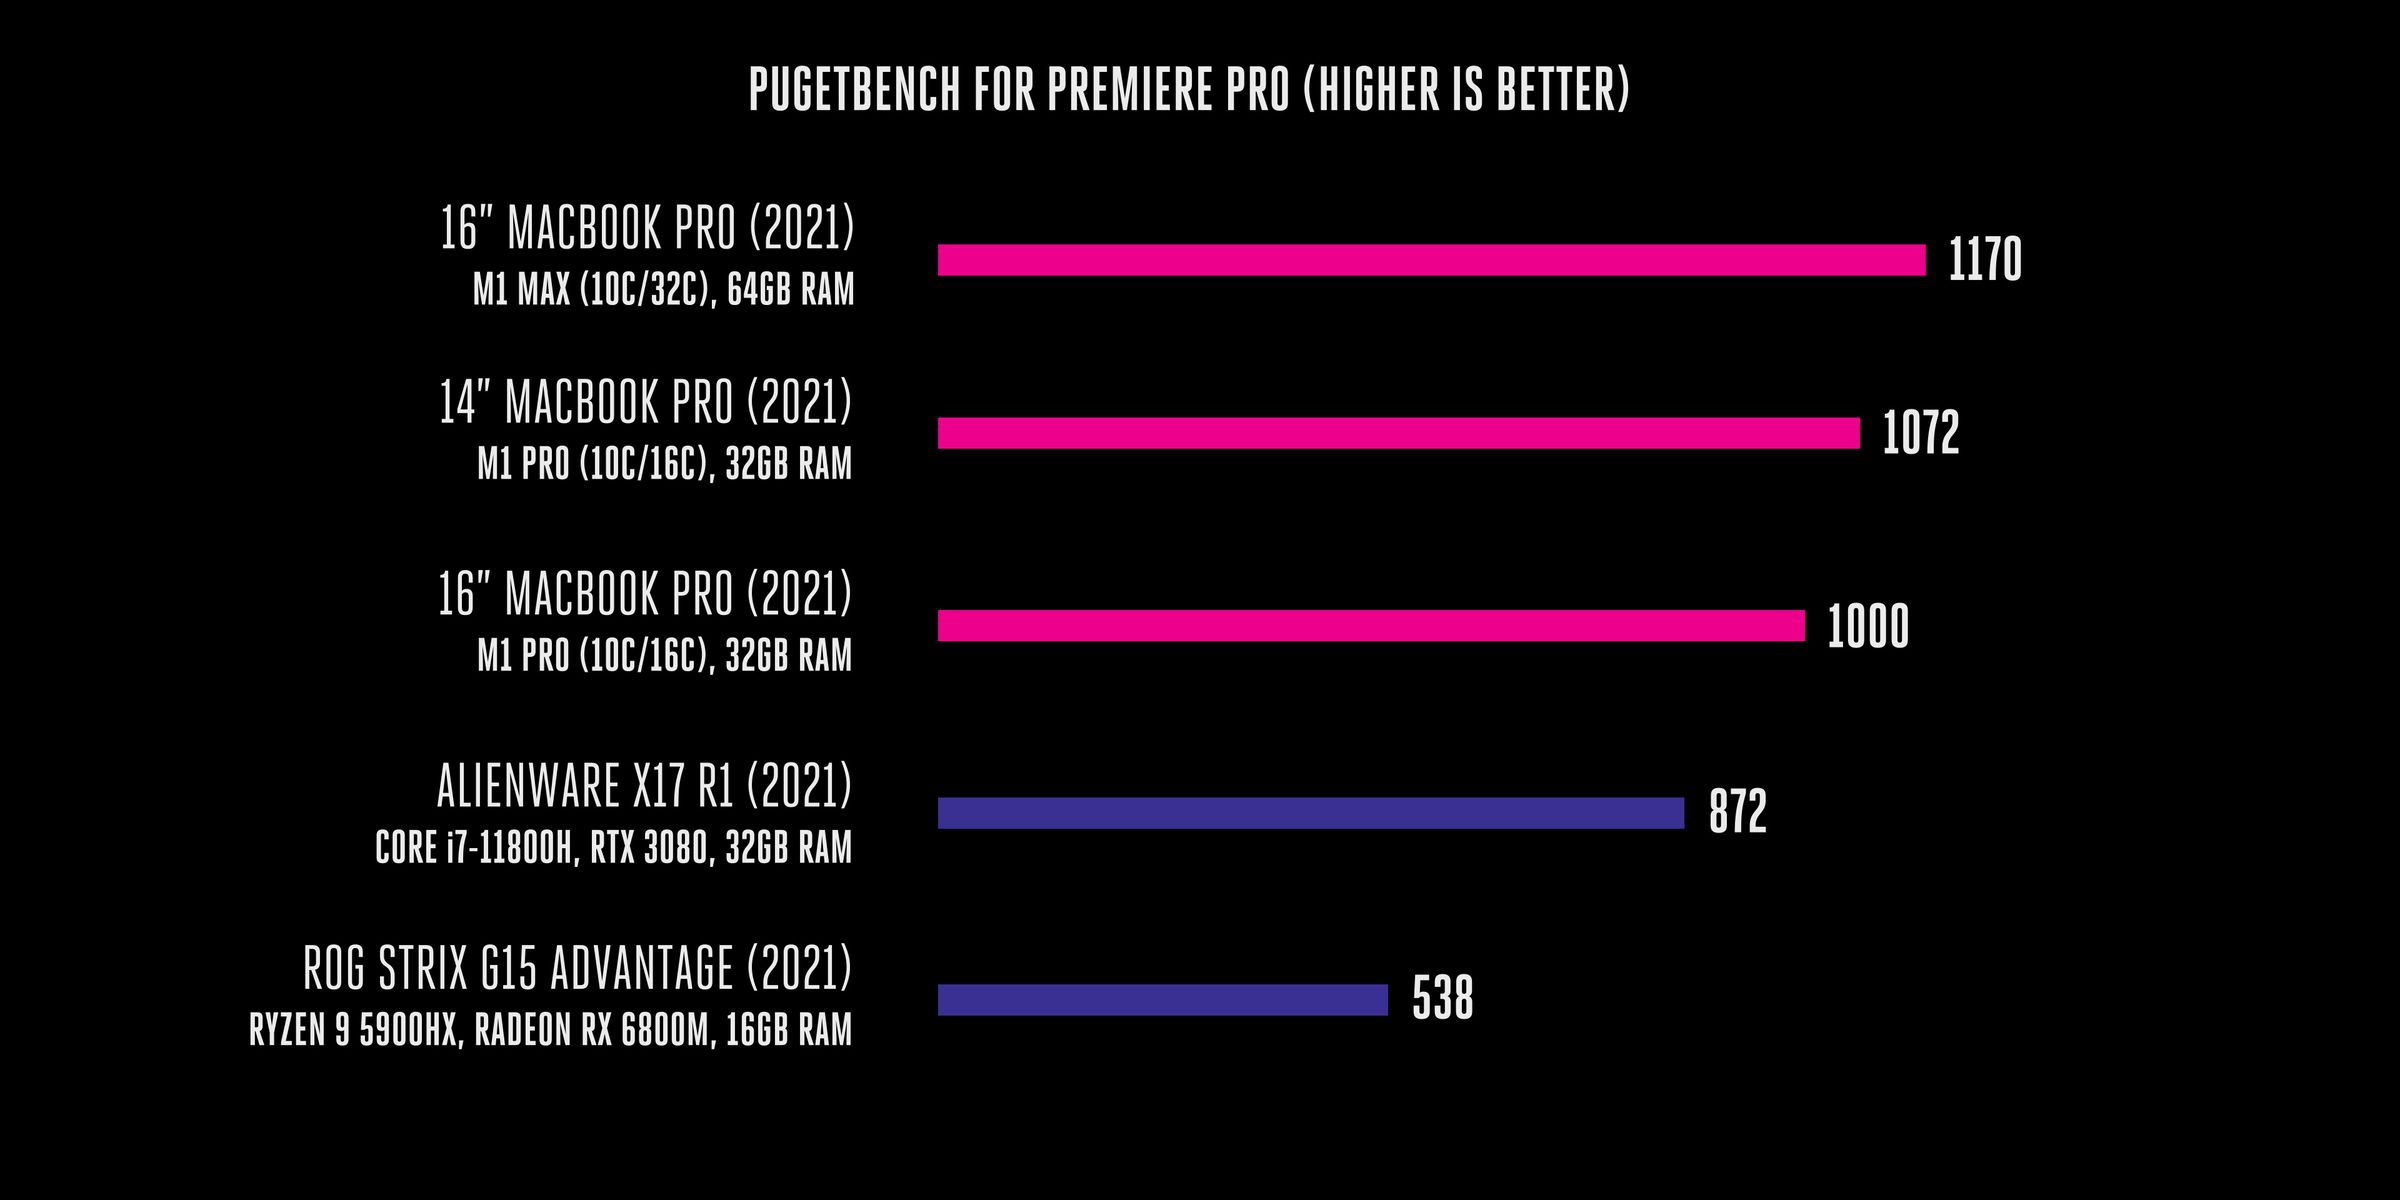 A bar graph showing 1,170 result in the PugetBench for Adobe Premiere Pro with the 16-inch MacBook Pro M1 Max, 1,072 for the 14-inch MacBook Pro M1 Pro, 1,000 for the 16-inch MacBook Pro M1 Pro, 872 for the Alienware X17 R1, and 538 for the ROG Strix G15 Advantage.